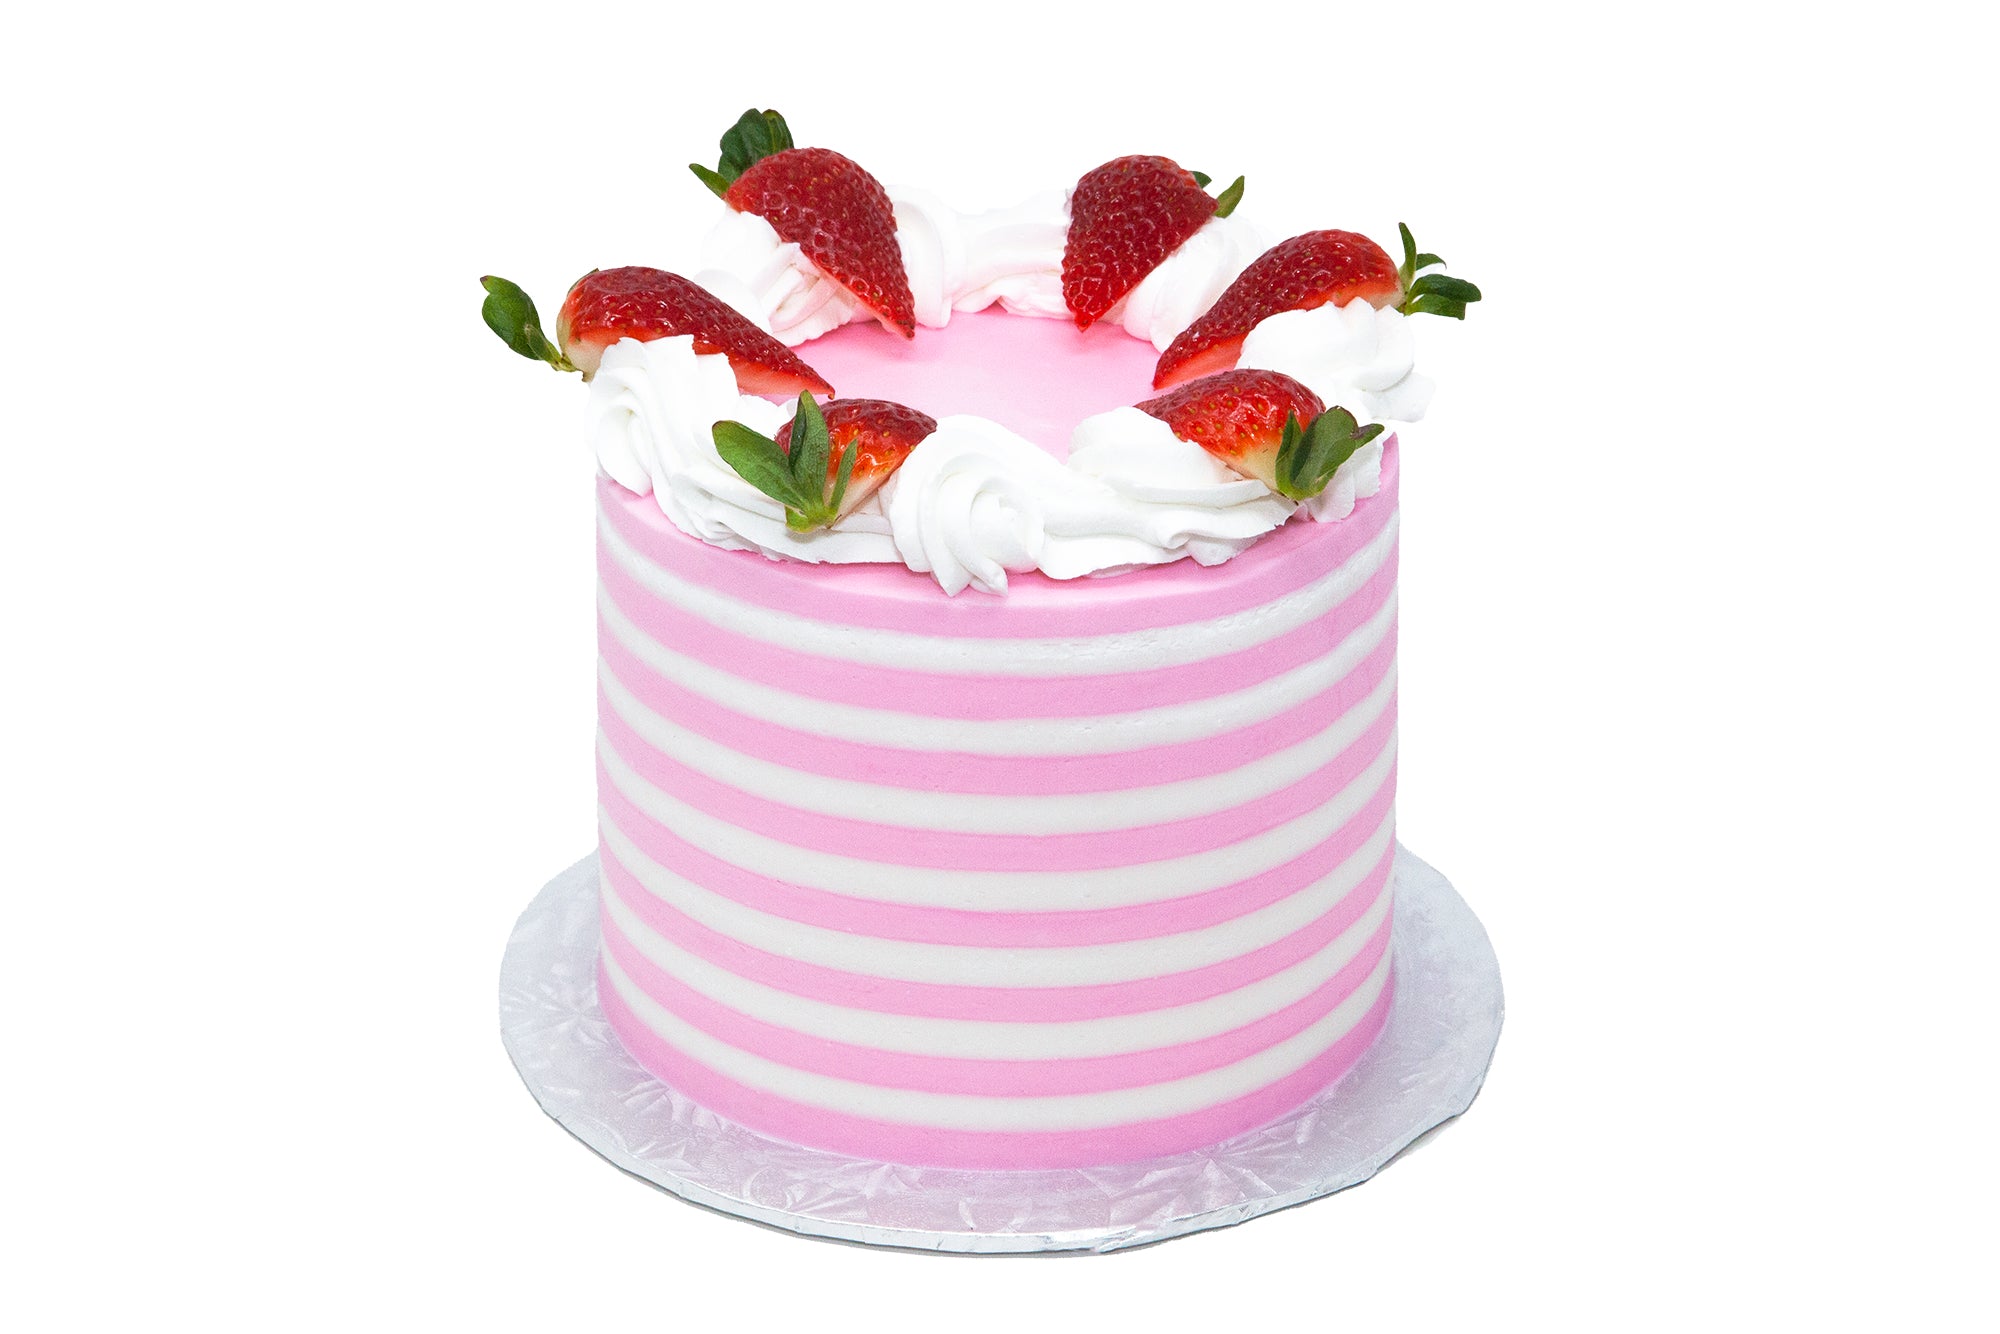 Strawberry Layer Cake With Stablised Whipped Cream — Arise Cake Creations